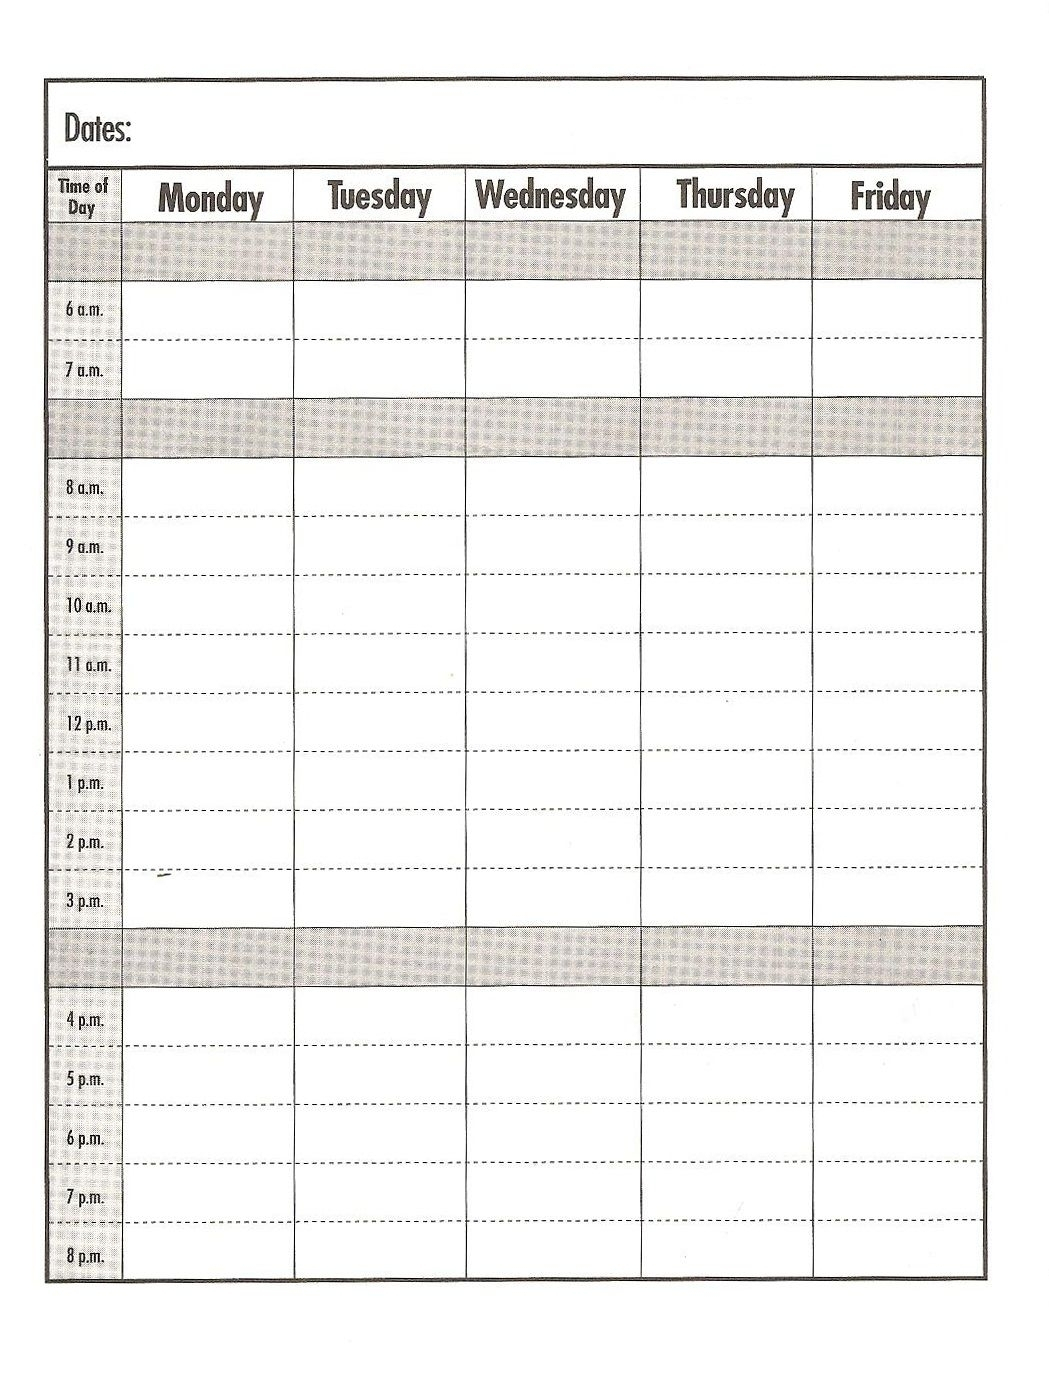 Free Calendar Print Out Pages Daily With Time Slots On with regard to Printable Daily Calendar With Time Slots